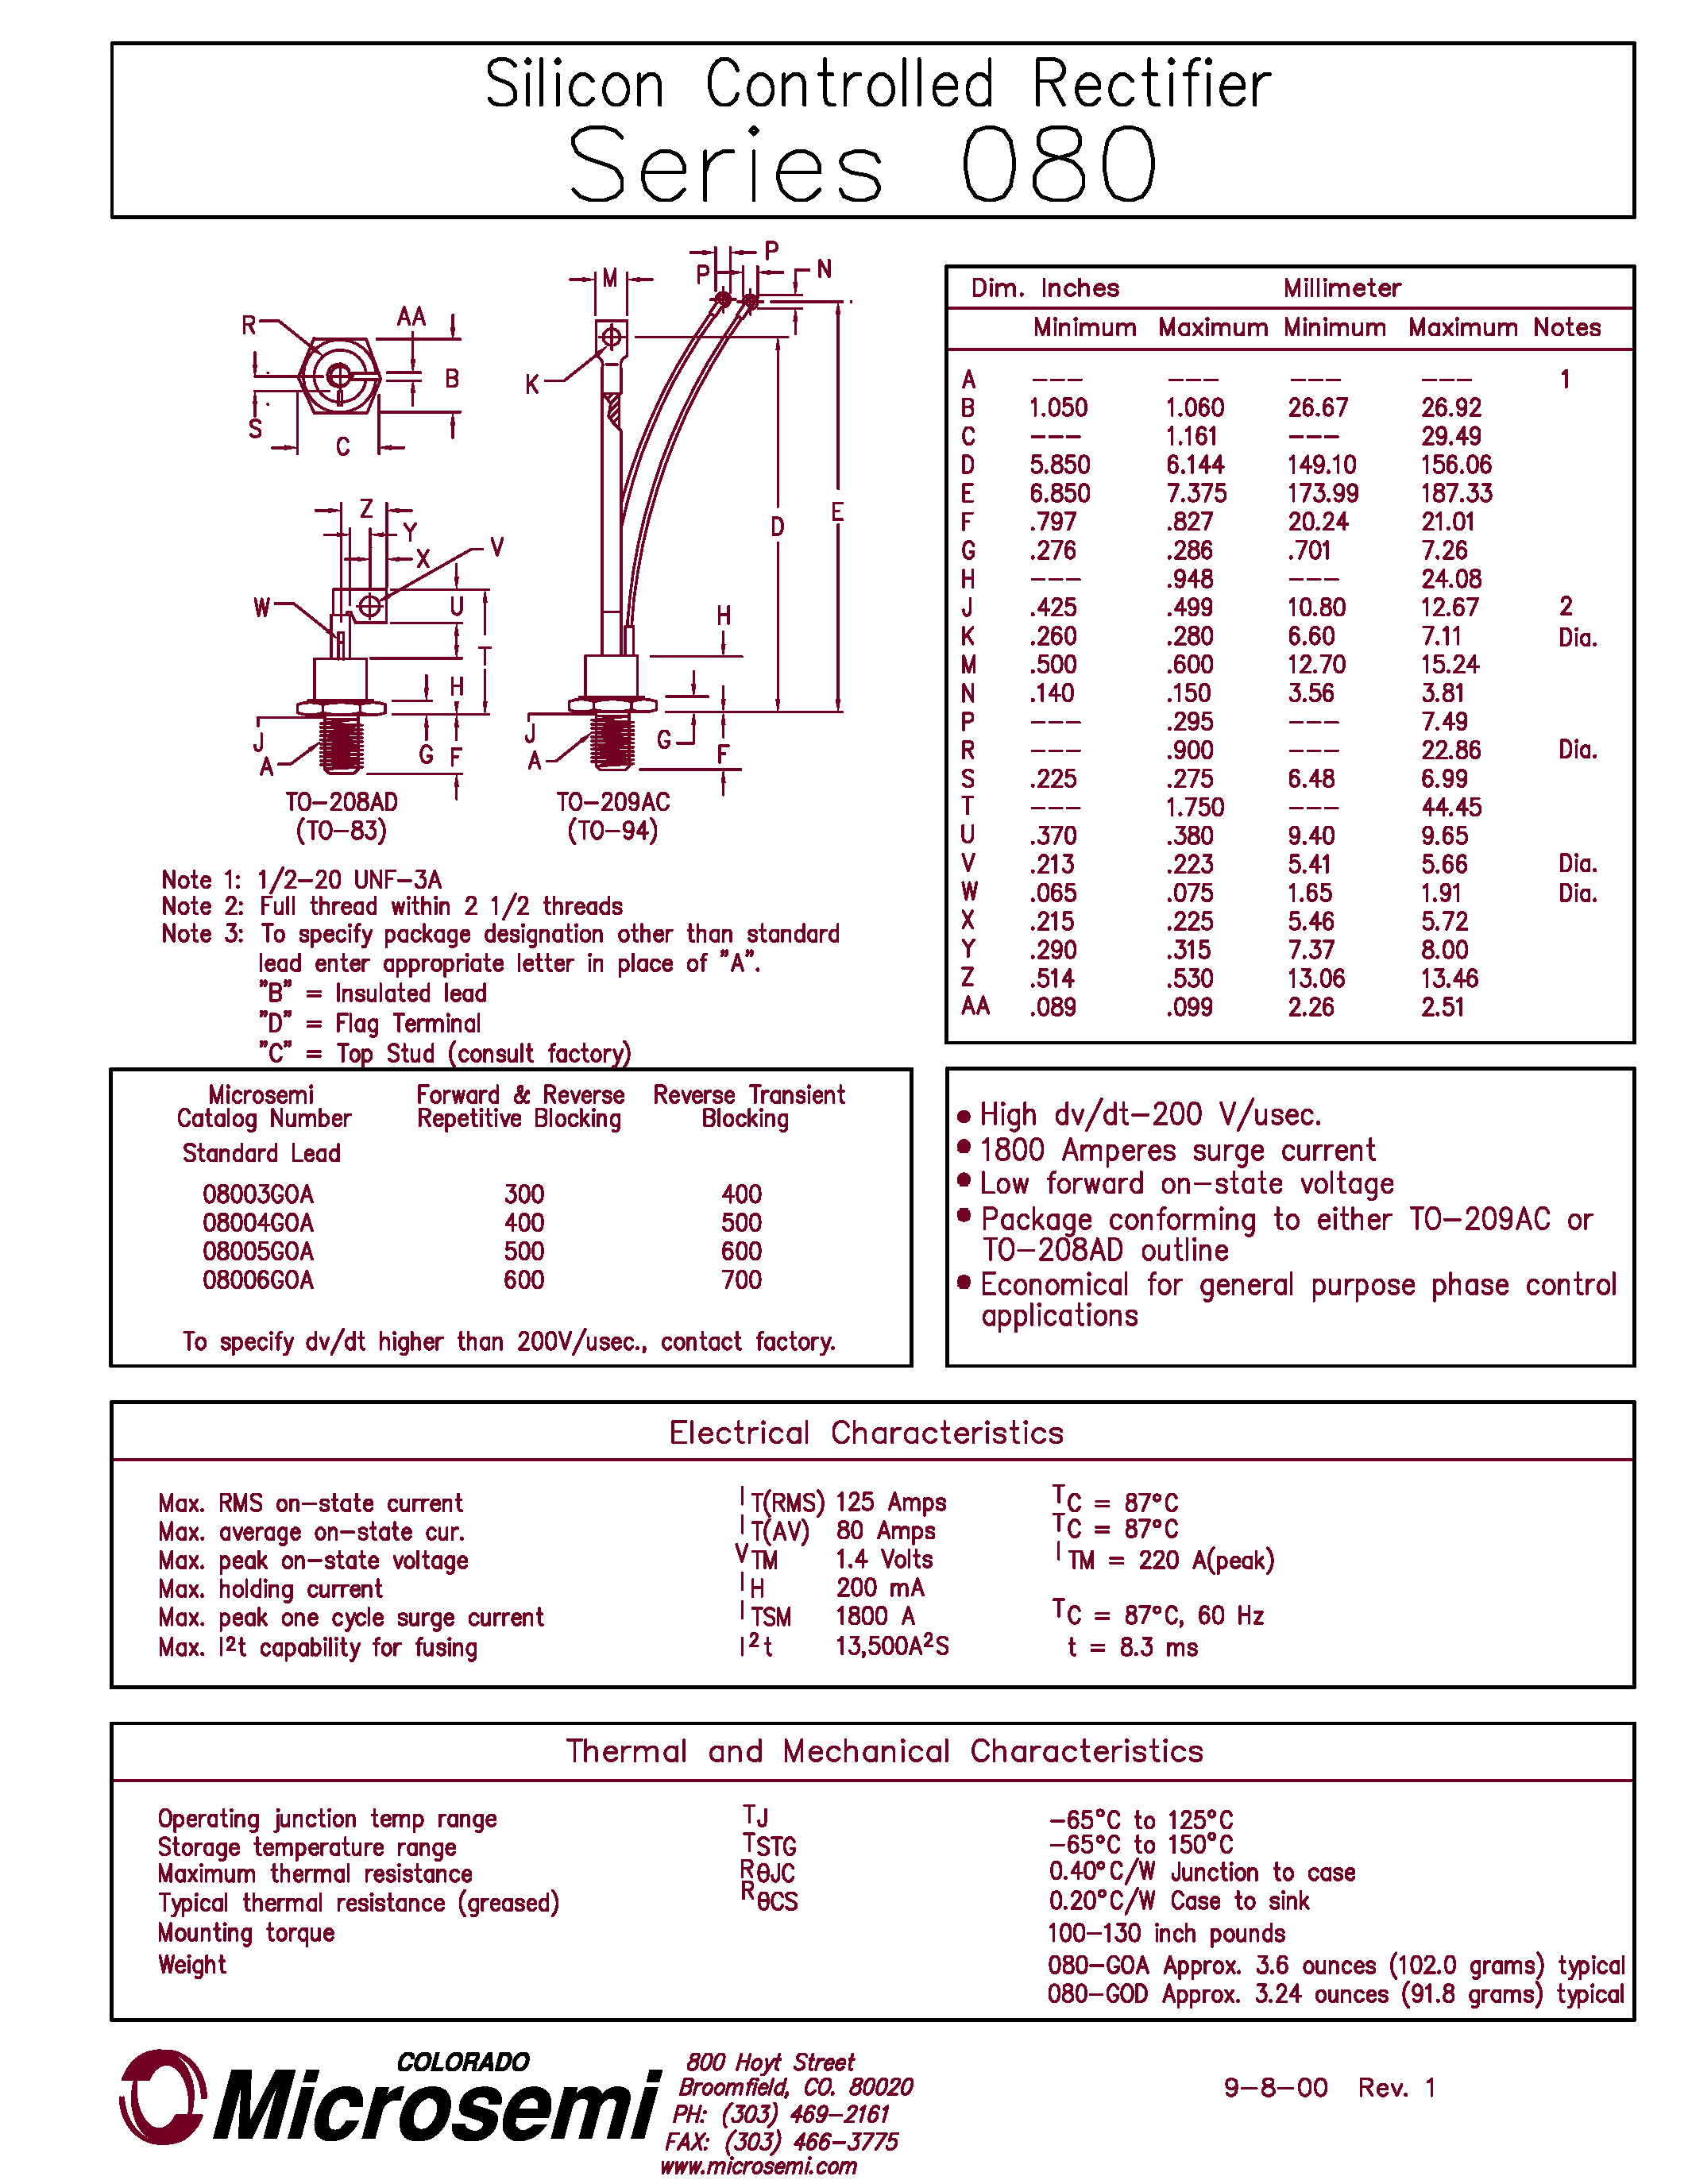 Datasheet 08004GOD - Silicon Controlled Rectifier page 1